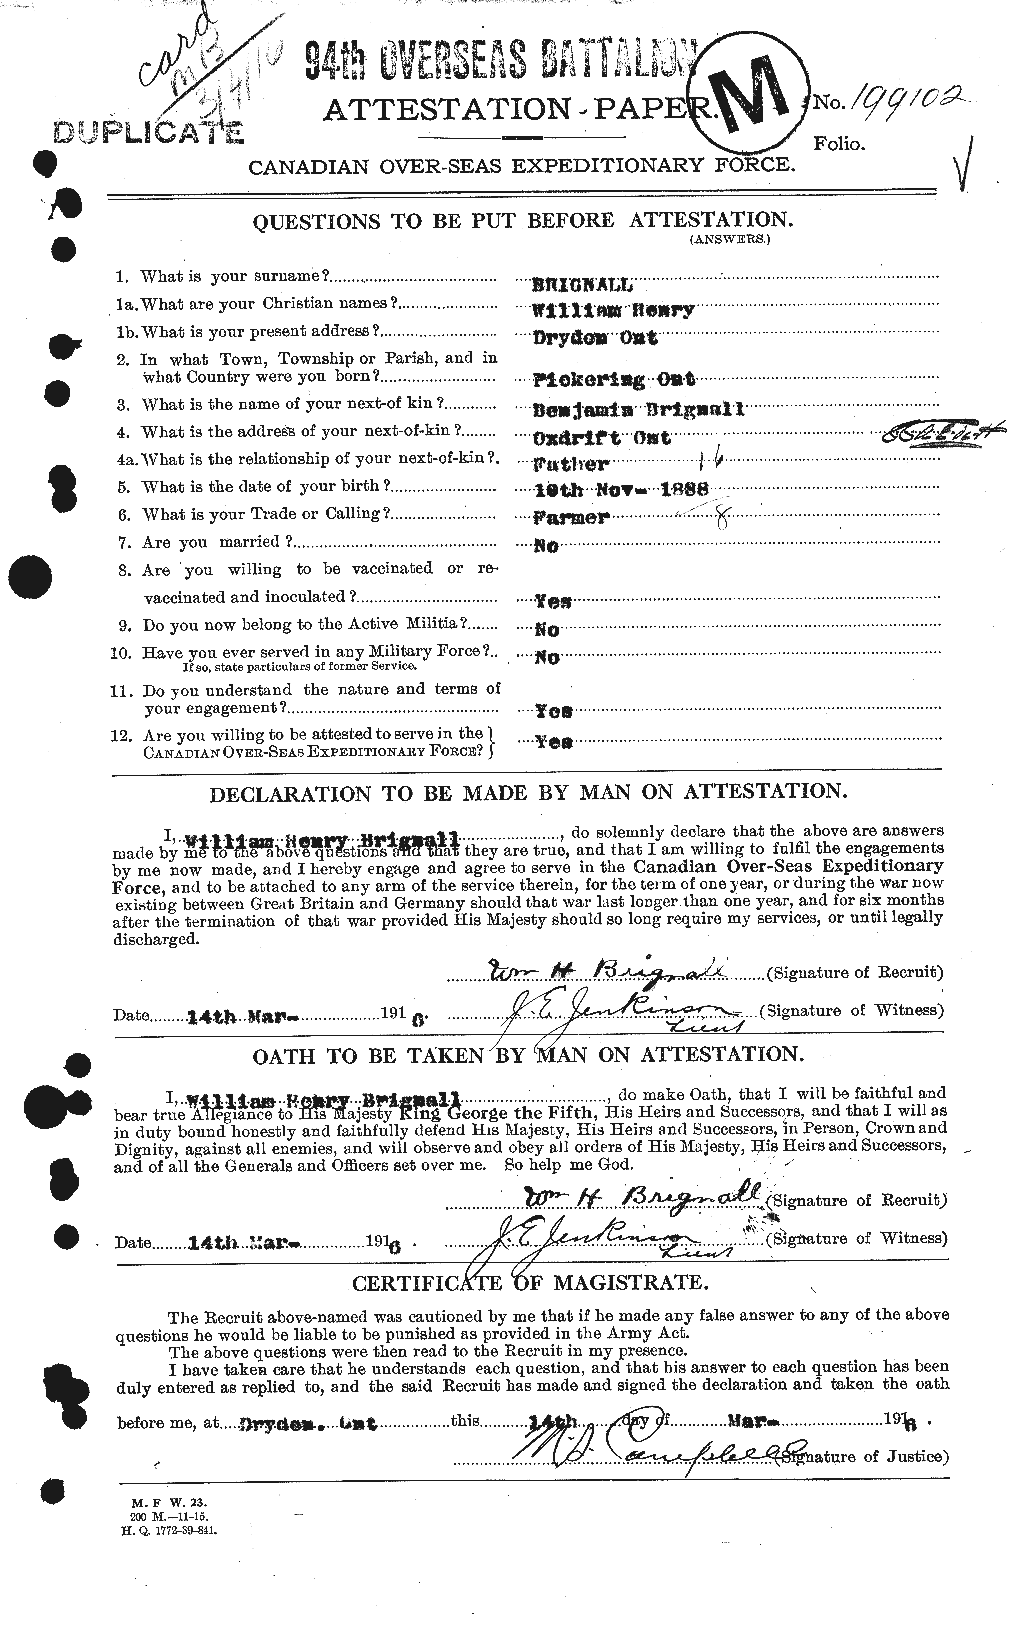 Personnel Records of the First World War - CEF 265138a